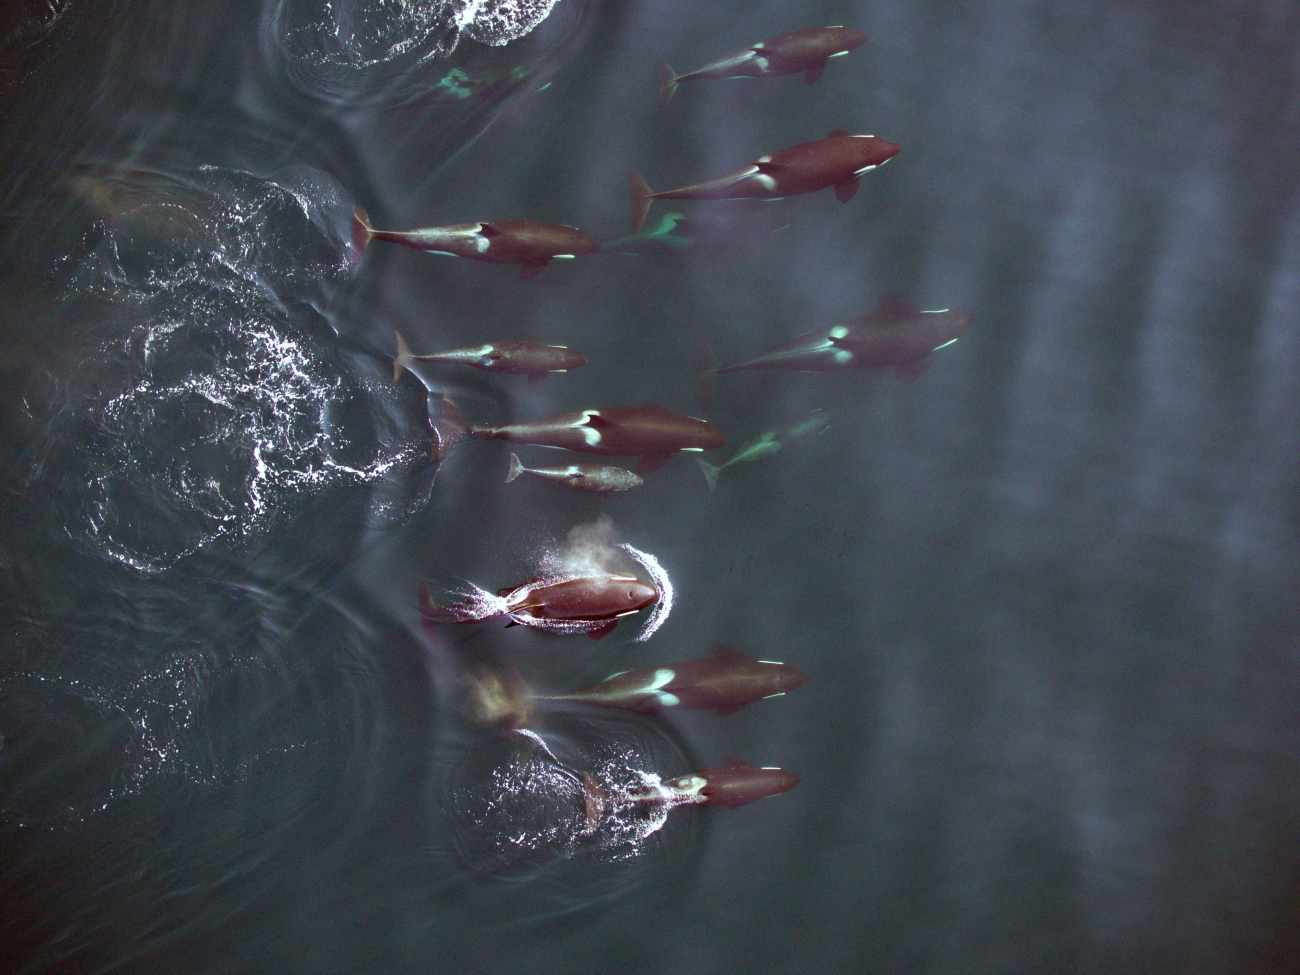 A northern-resident killer whale family as seen from UAV drone